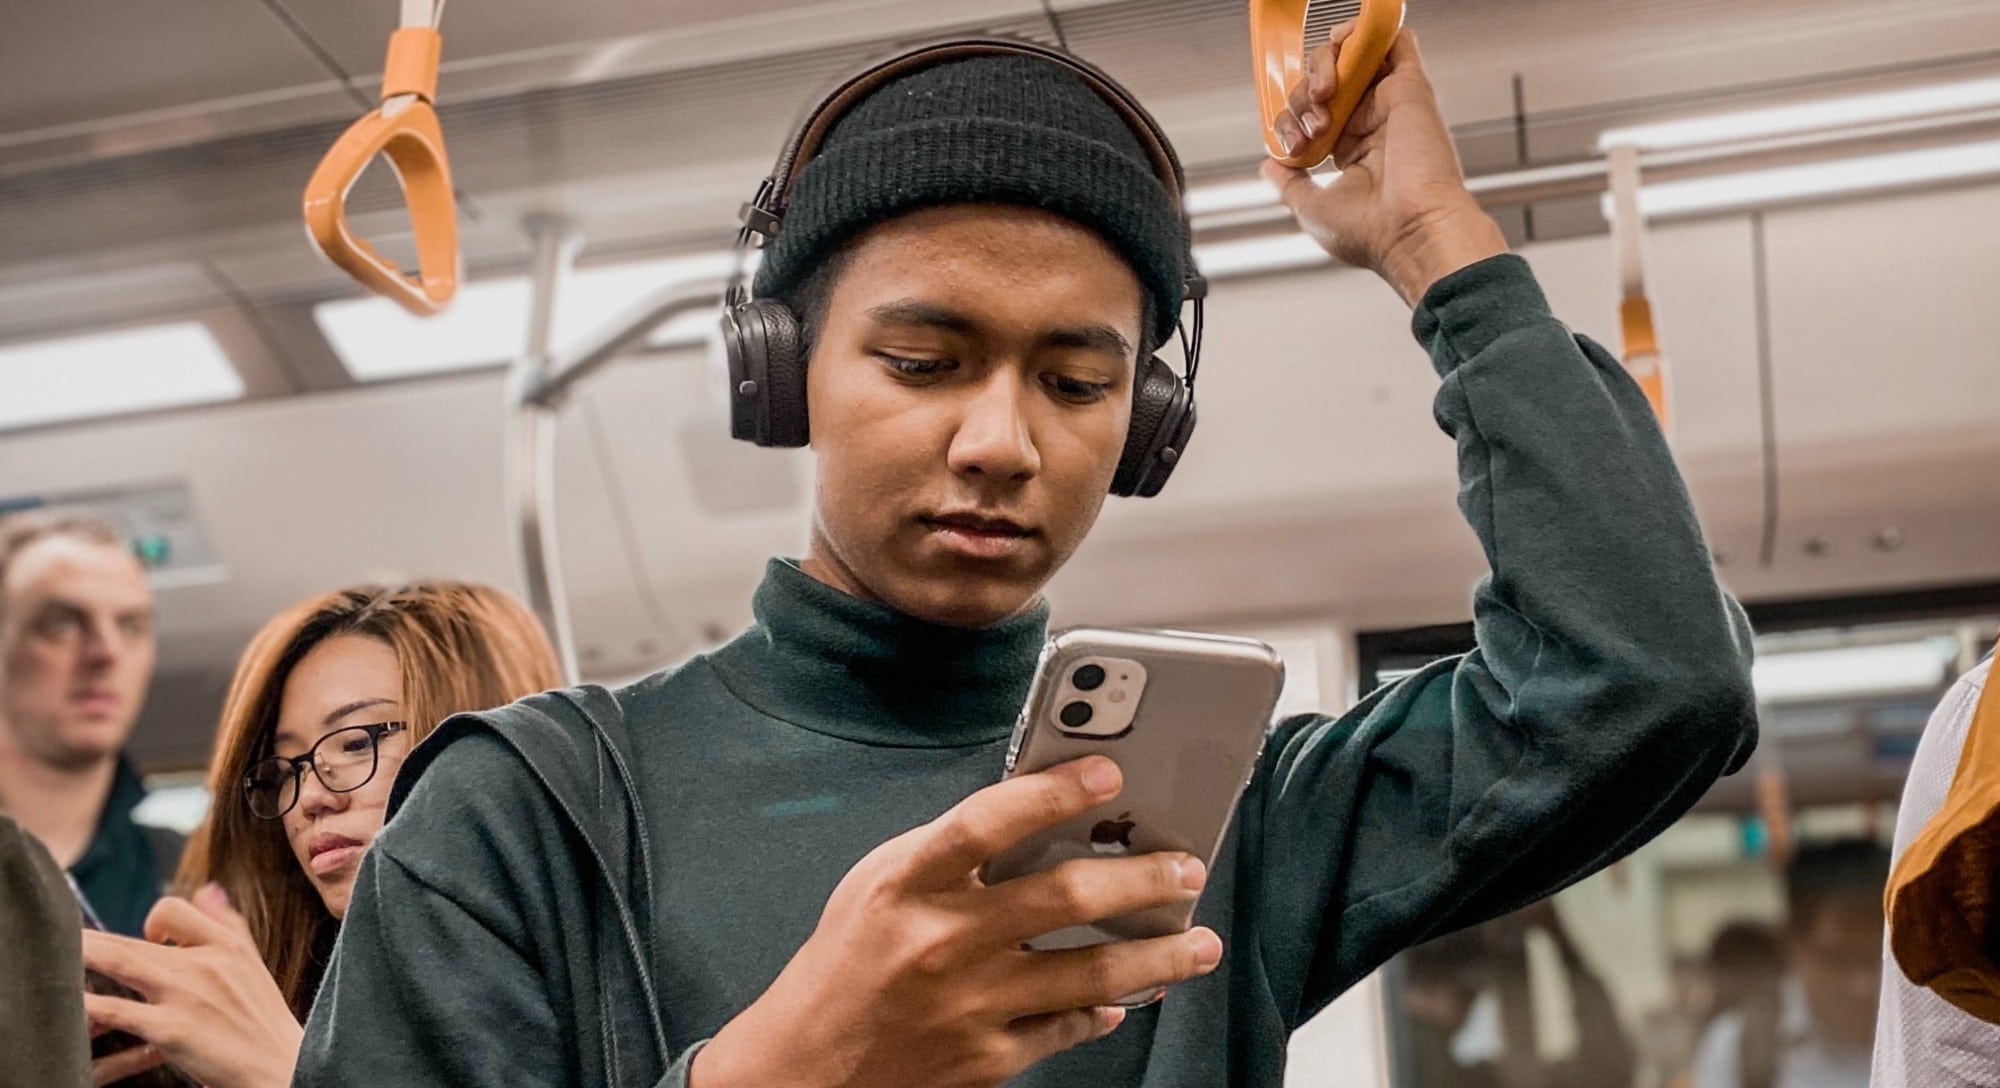 A man on a train looking his phone